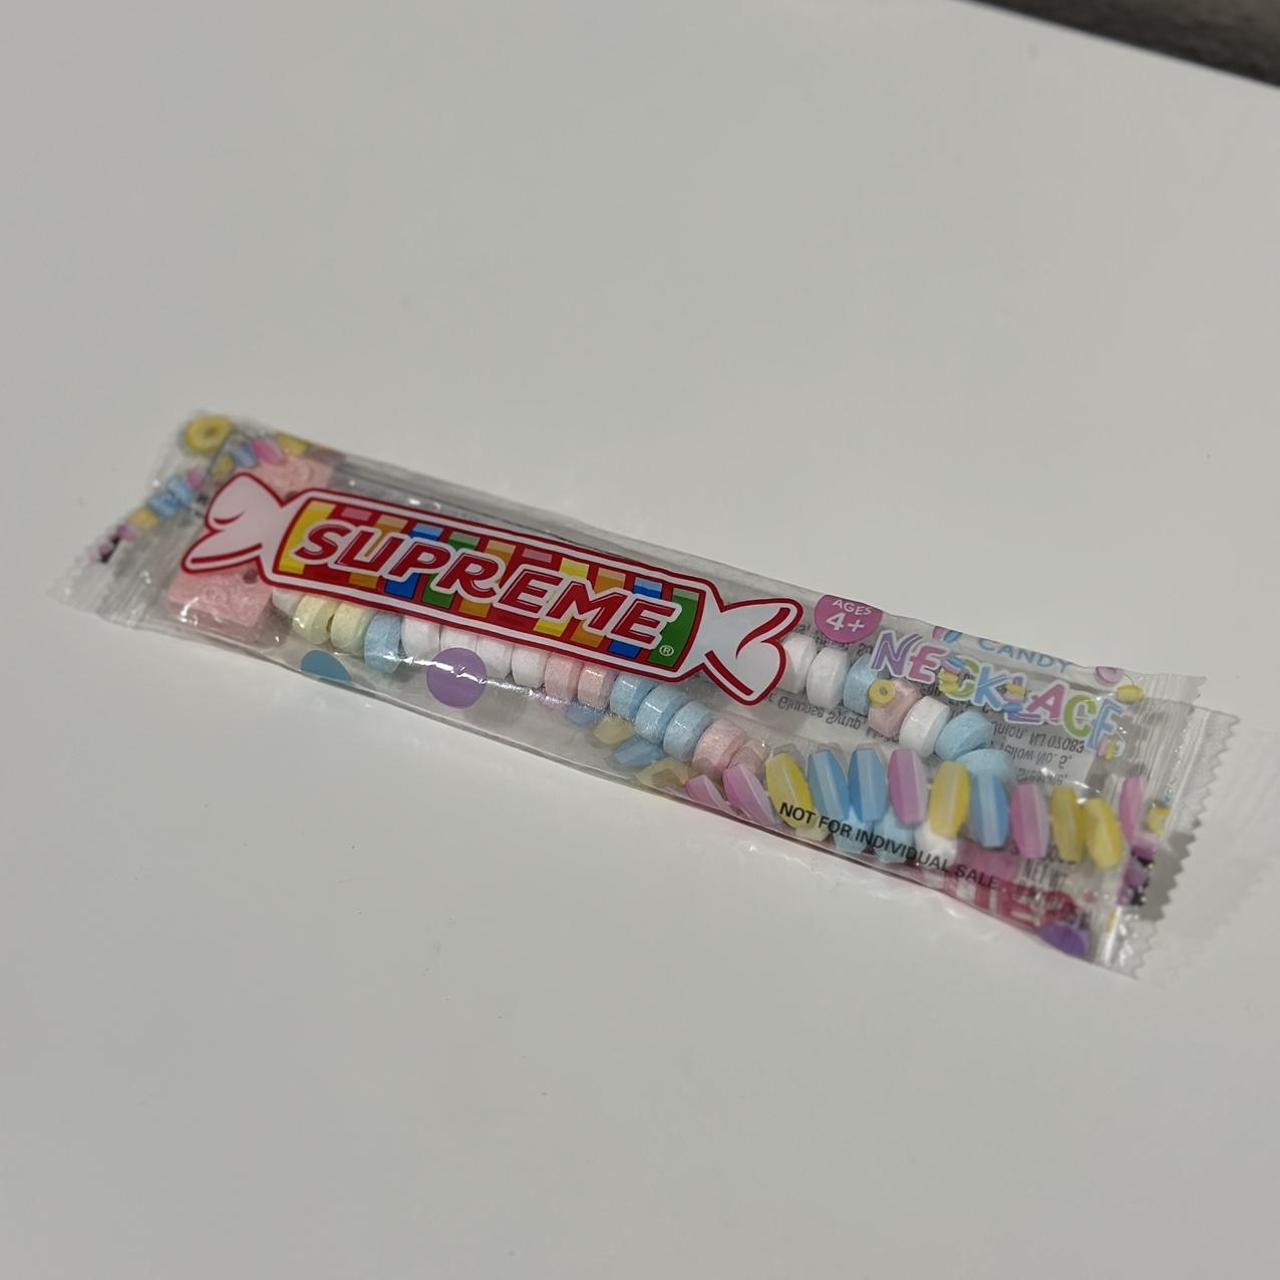 NTWRK - Supreme Smarties Candy Necklace